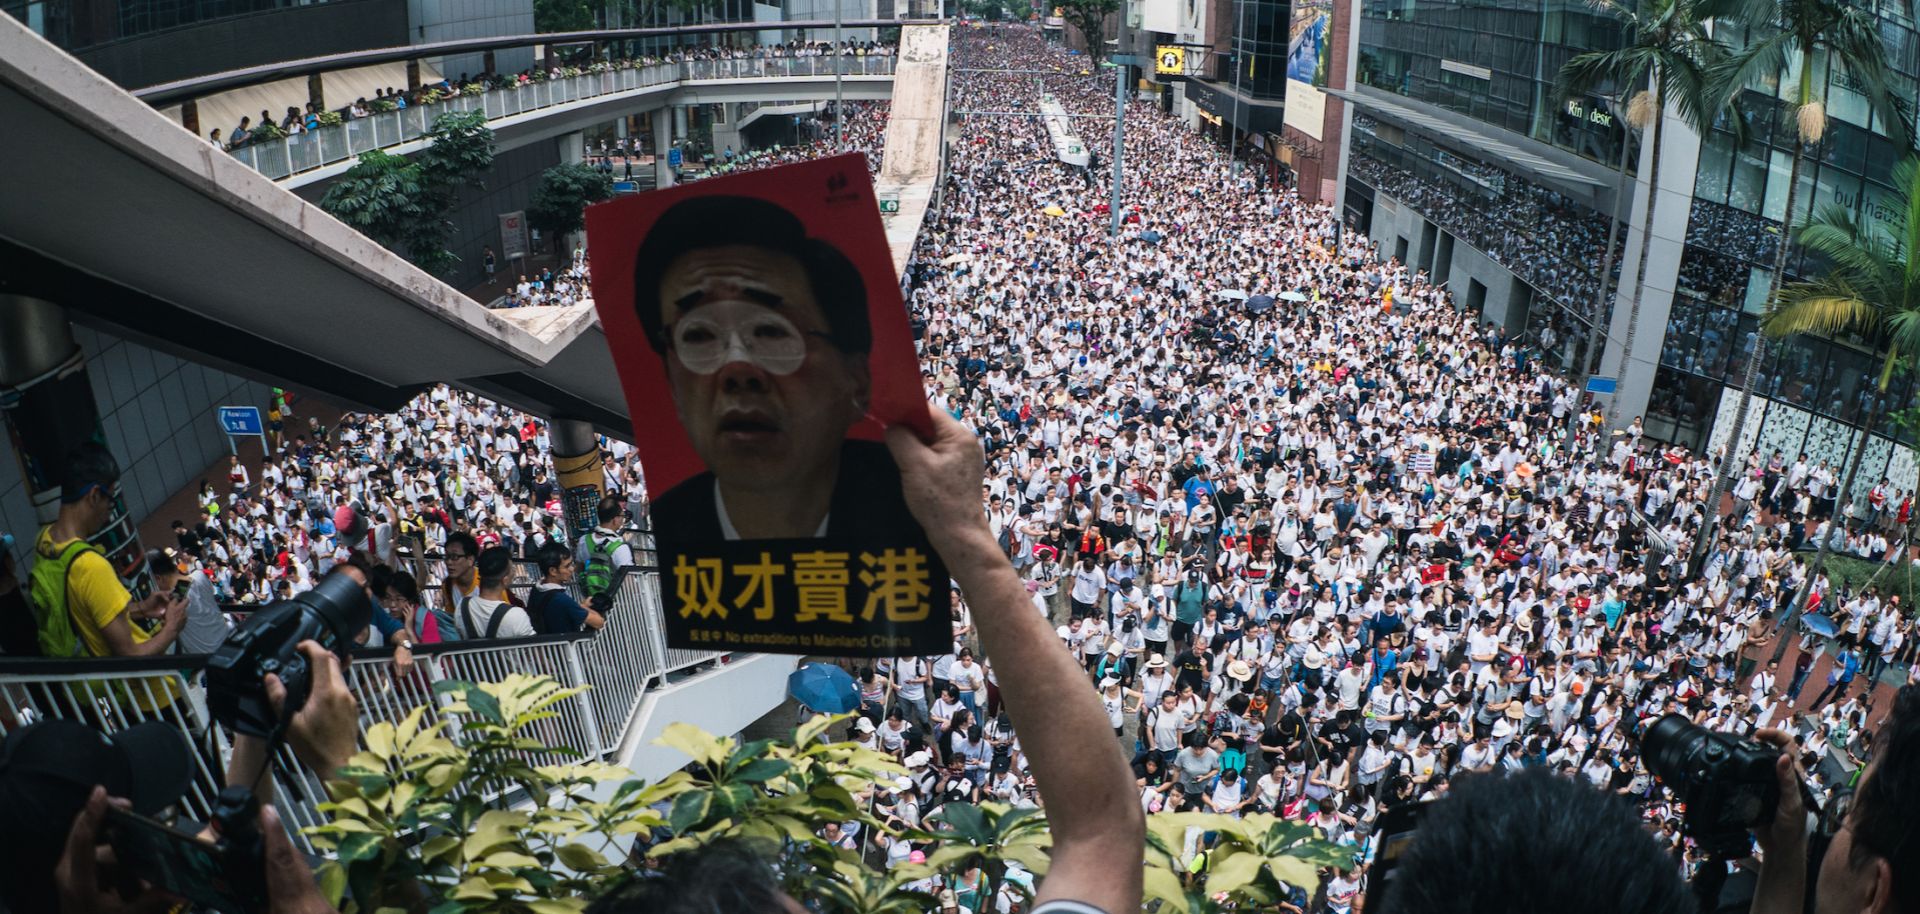 People in Hong Kong join a mass protest against the government's controversial extradition law on June 9, 2019.